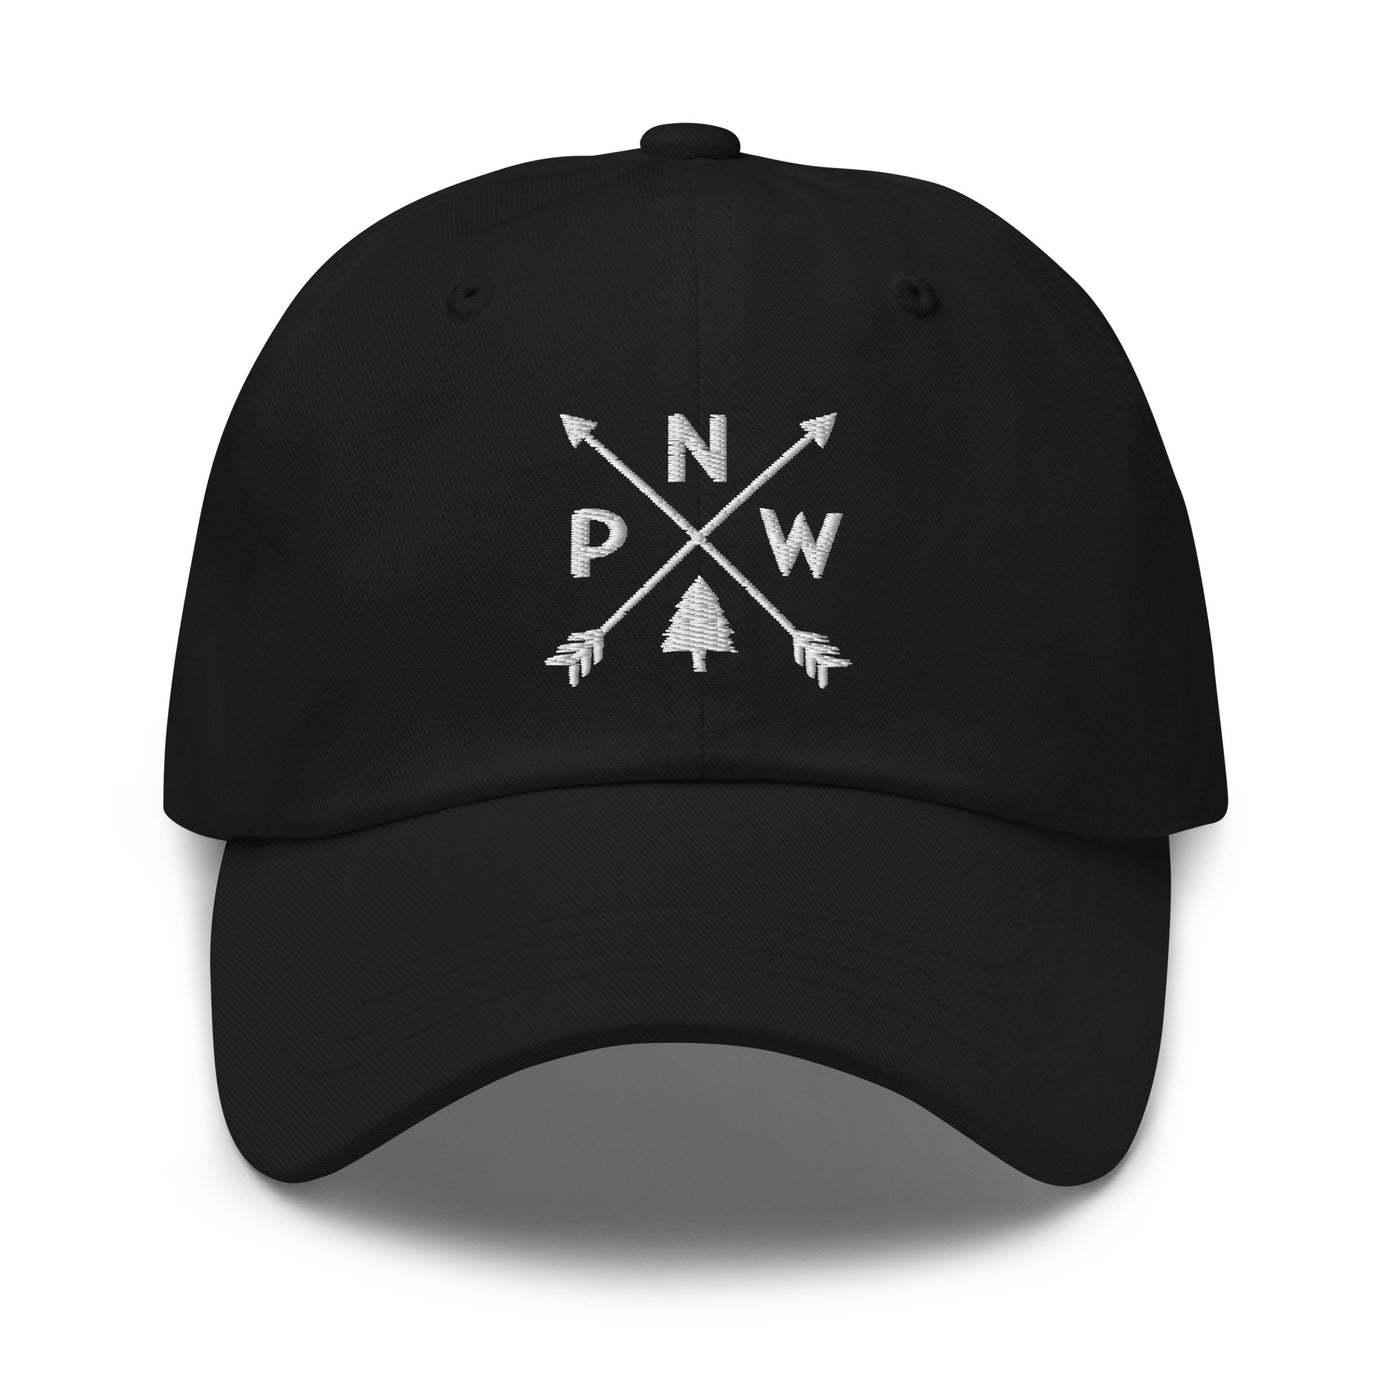 PNW Arrows Embroidered Hat